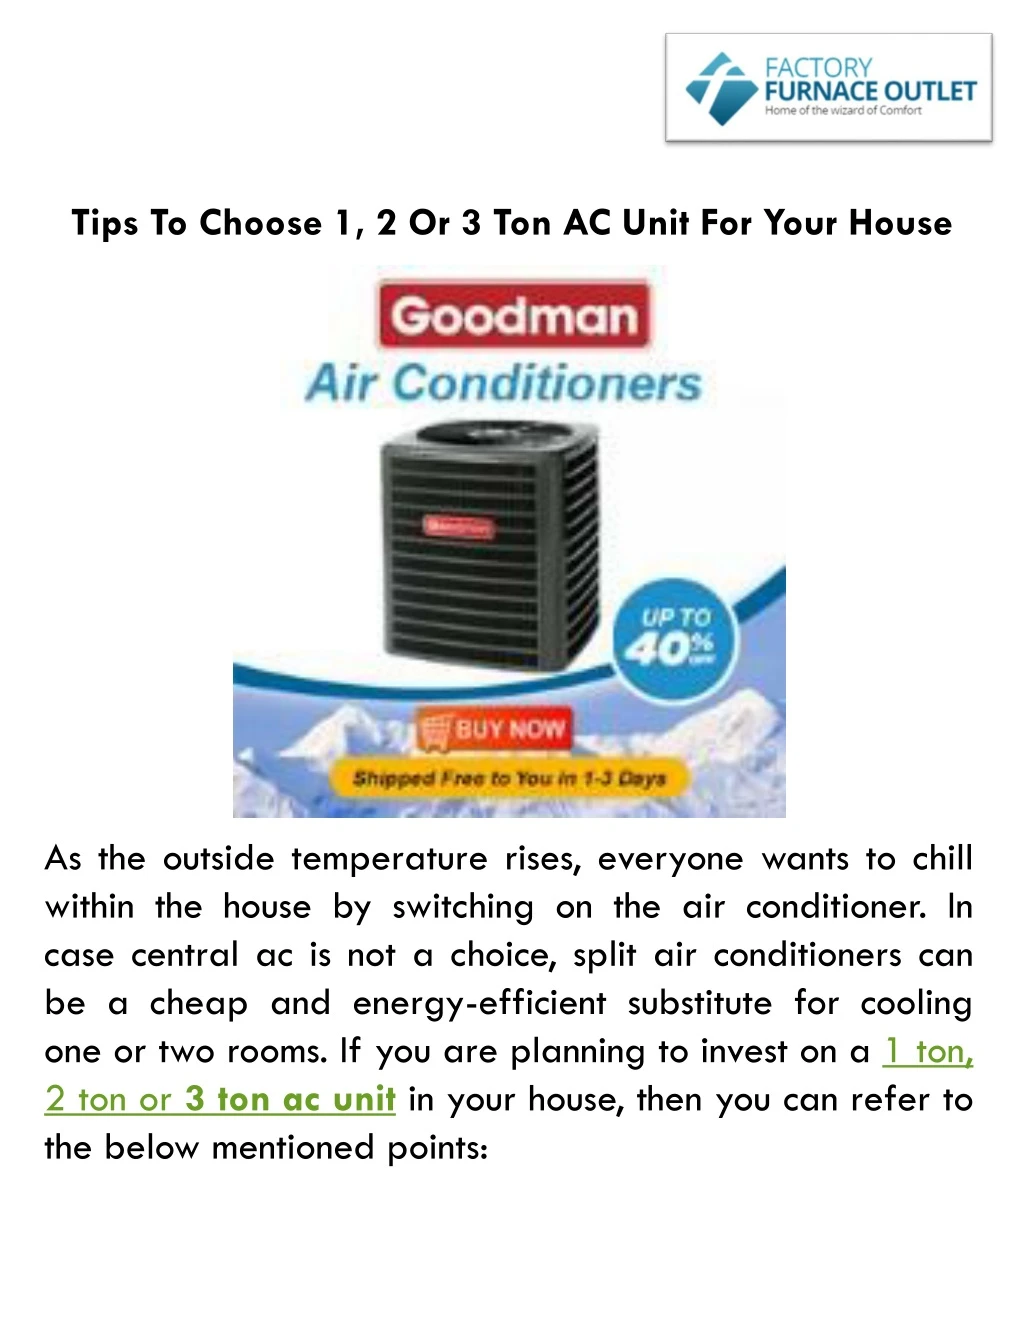 tips to choose 1 2 or 3 ton ac unit for your house